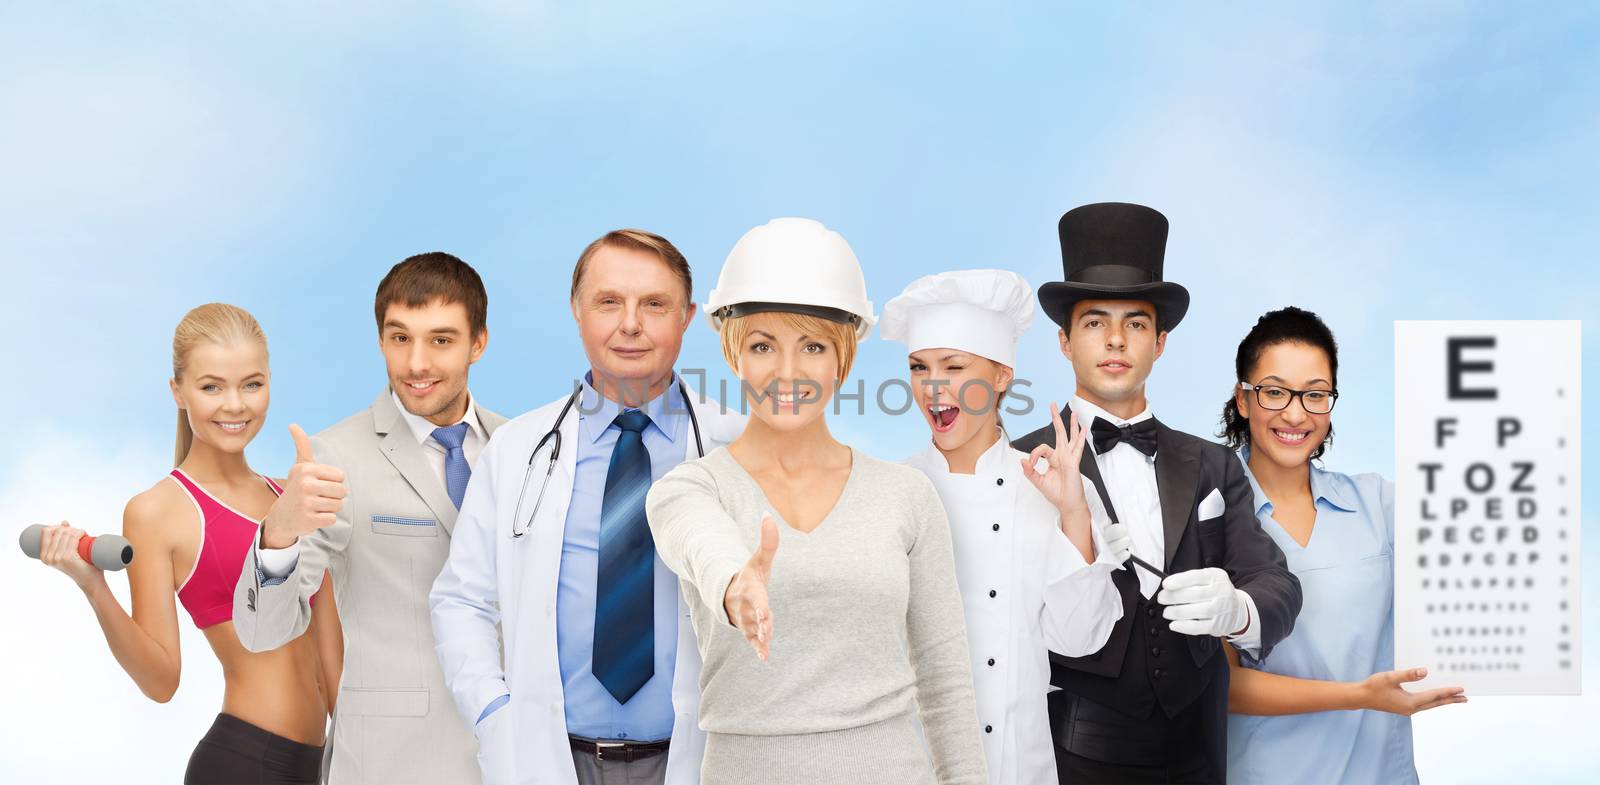 professions and people concept - group of people including cook, doctor, nurse, magician and personal trainer